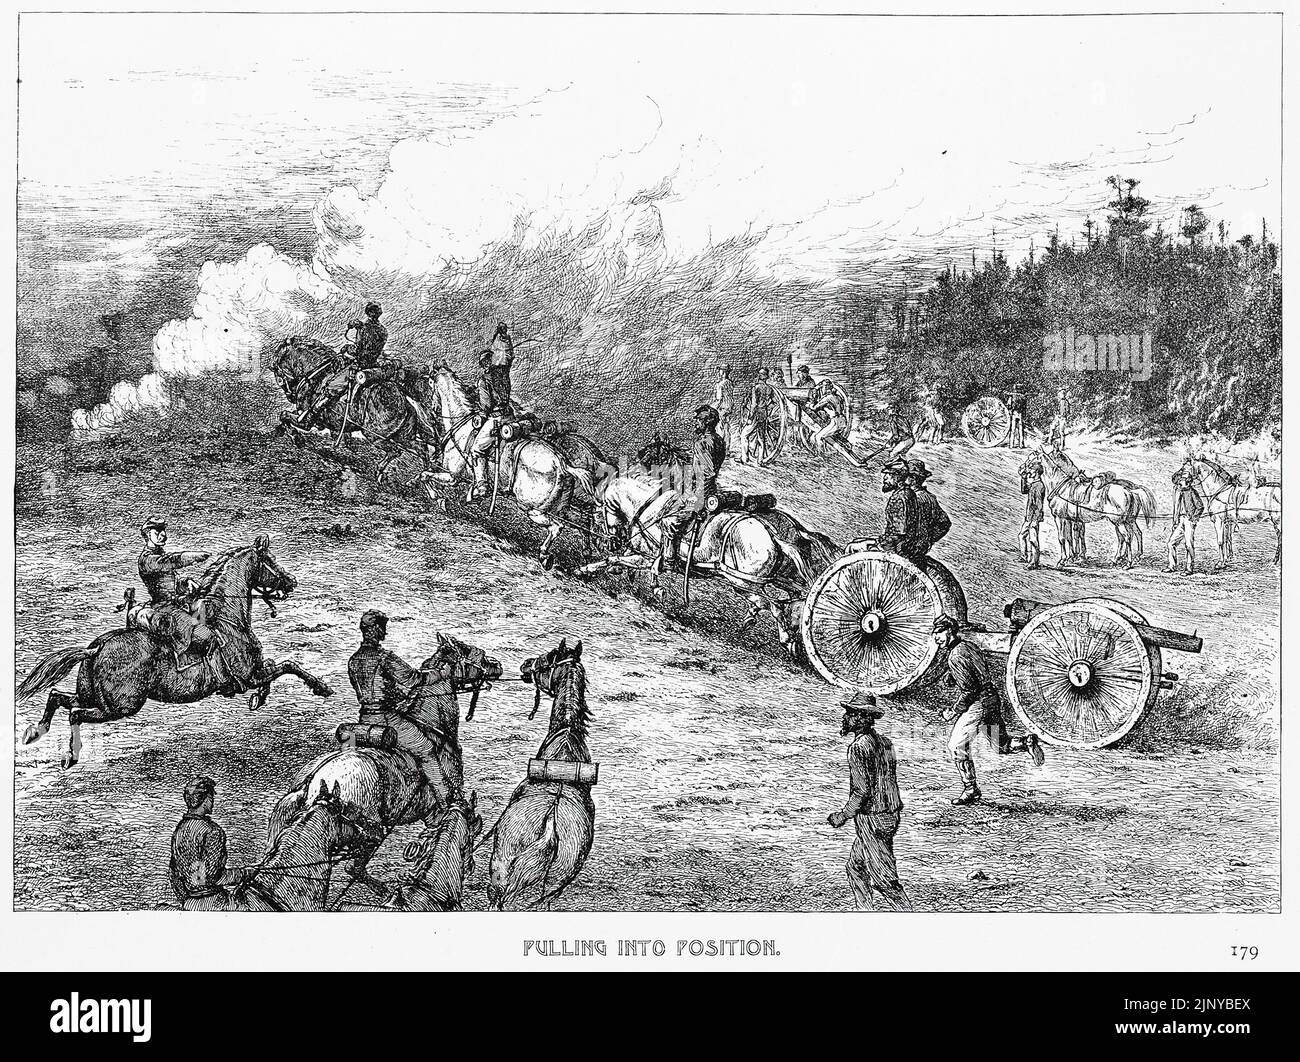 Pulling Into Position. Battle of Gettysburg, July 1863. 19th century American Civil War illustration by Edwin Forbes Stock Photo